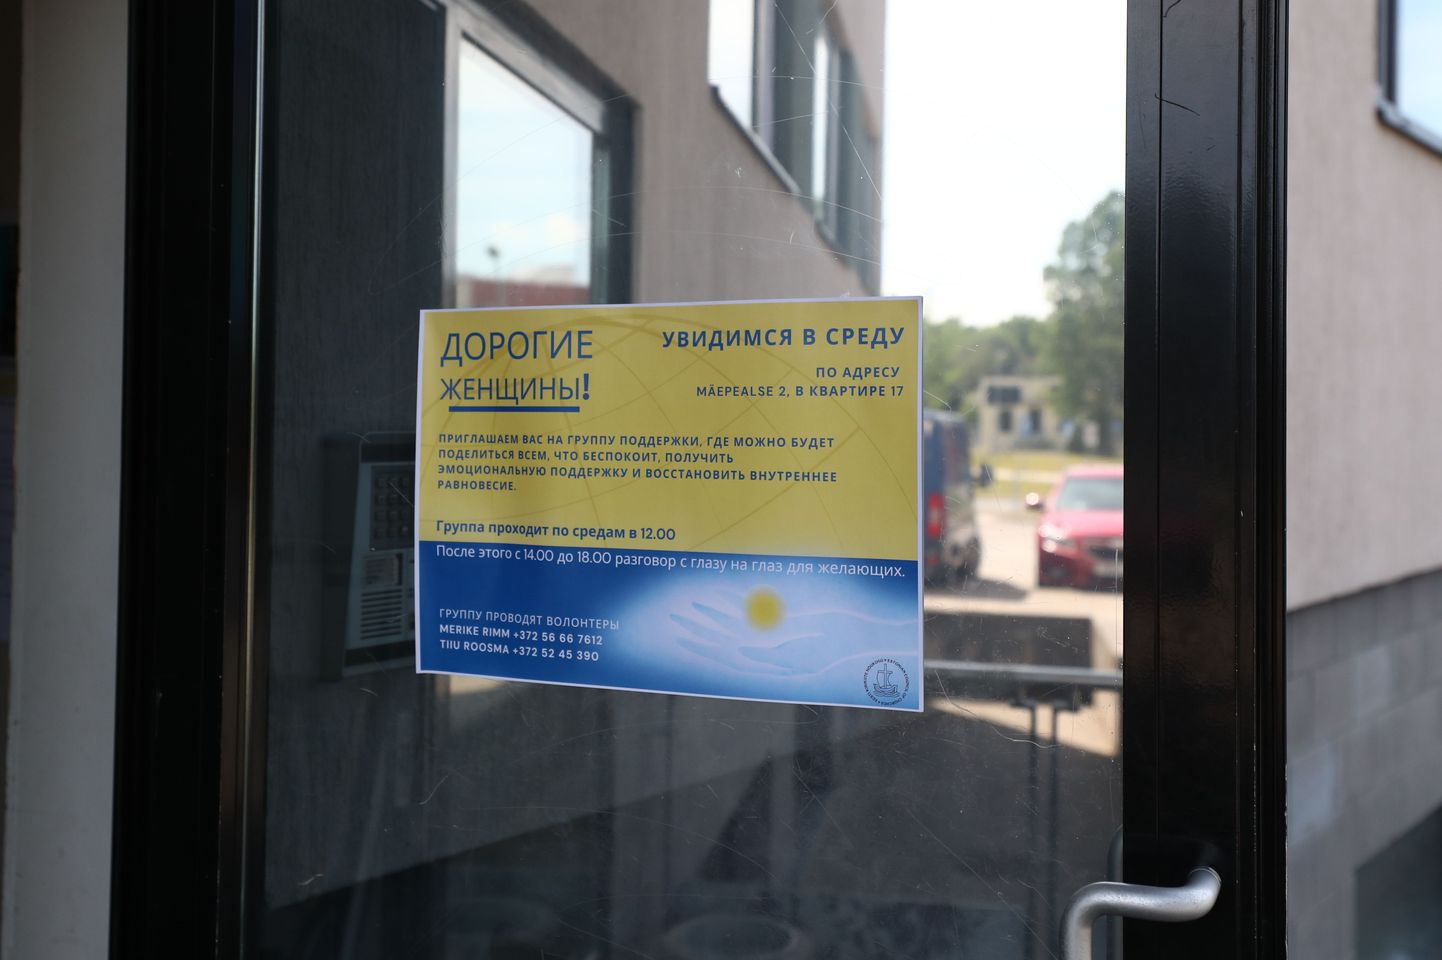 Those who fled the war from Ukraine have already established their lives more permanently in the Mäepealnes house, and a support group also meets there. But now their lives are once again in danger of falling apart.